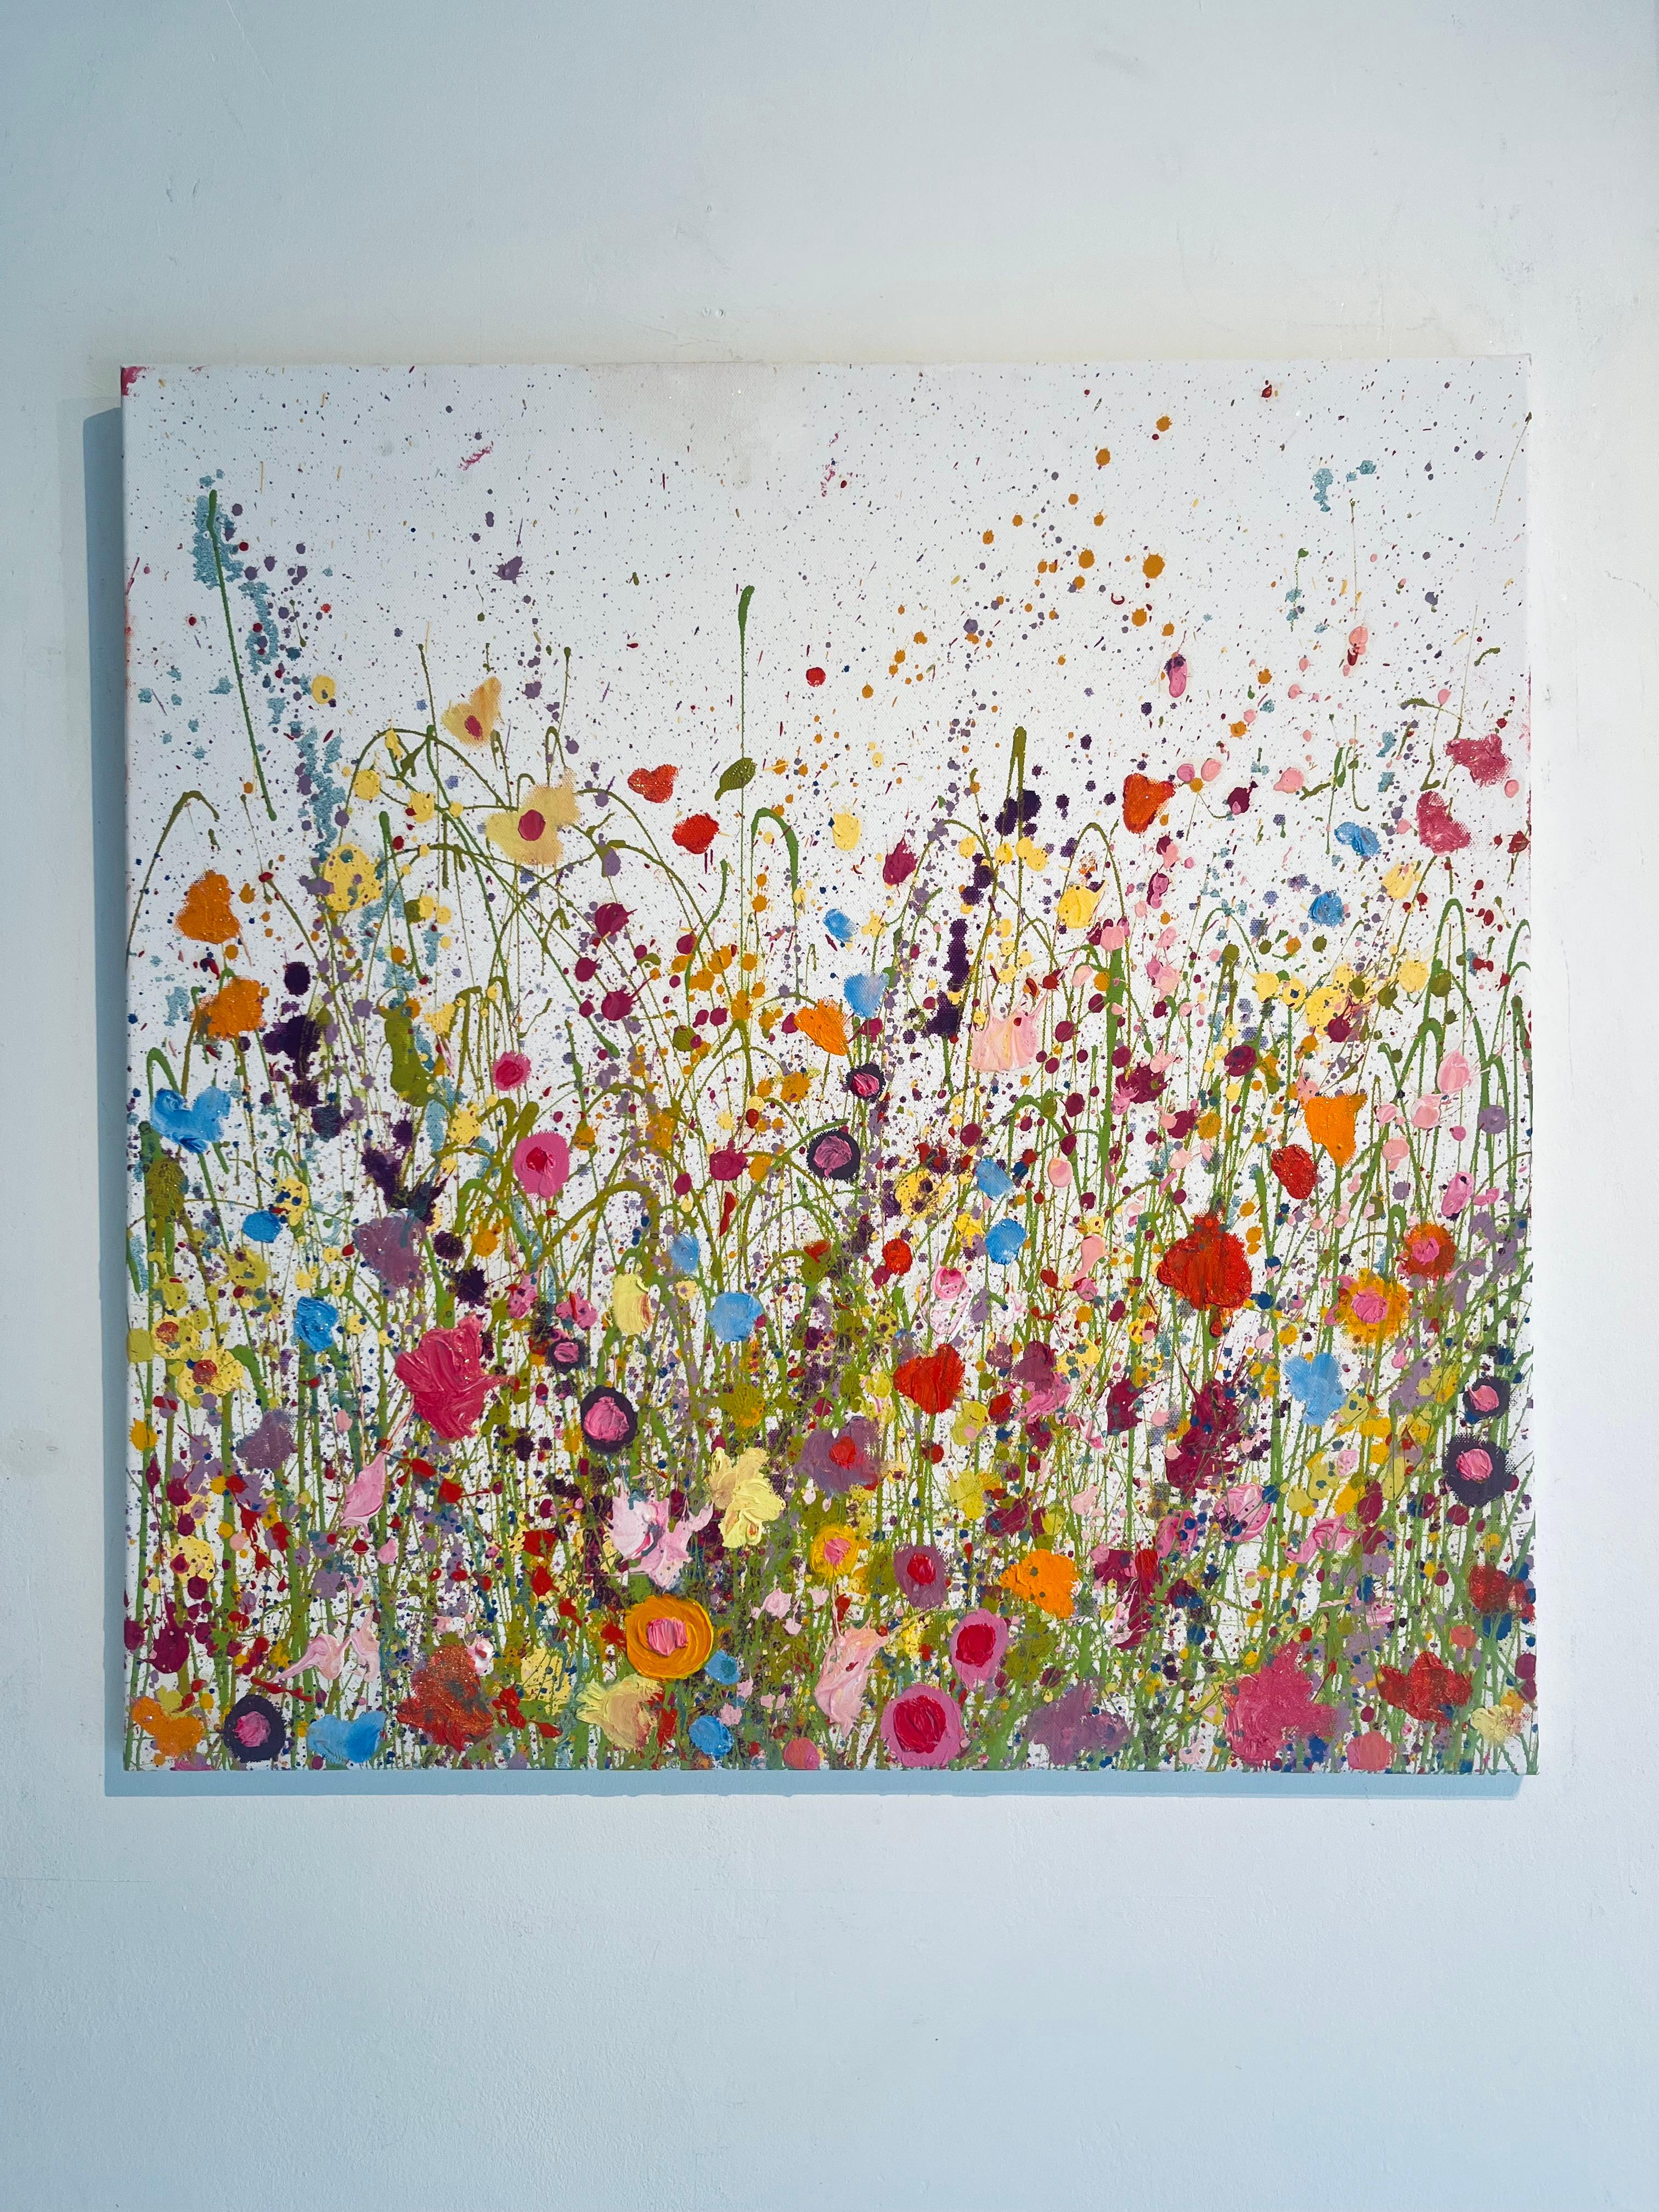 Where Doves Kiss (ii) -original abstract floral oil painting- contemporary art - Painting by Yvonne Coomber